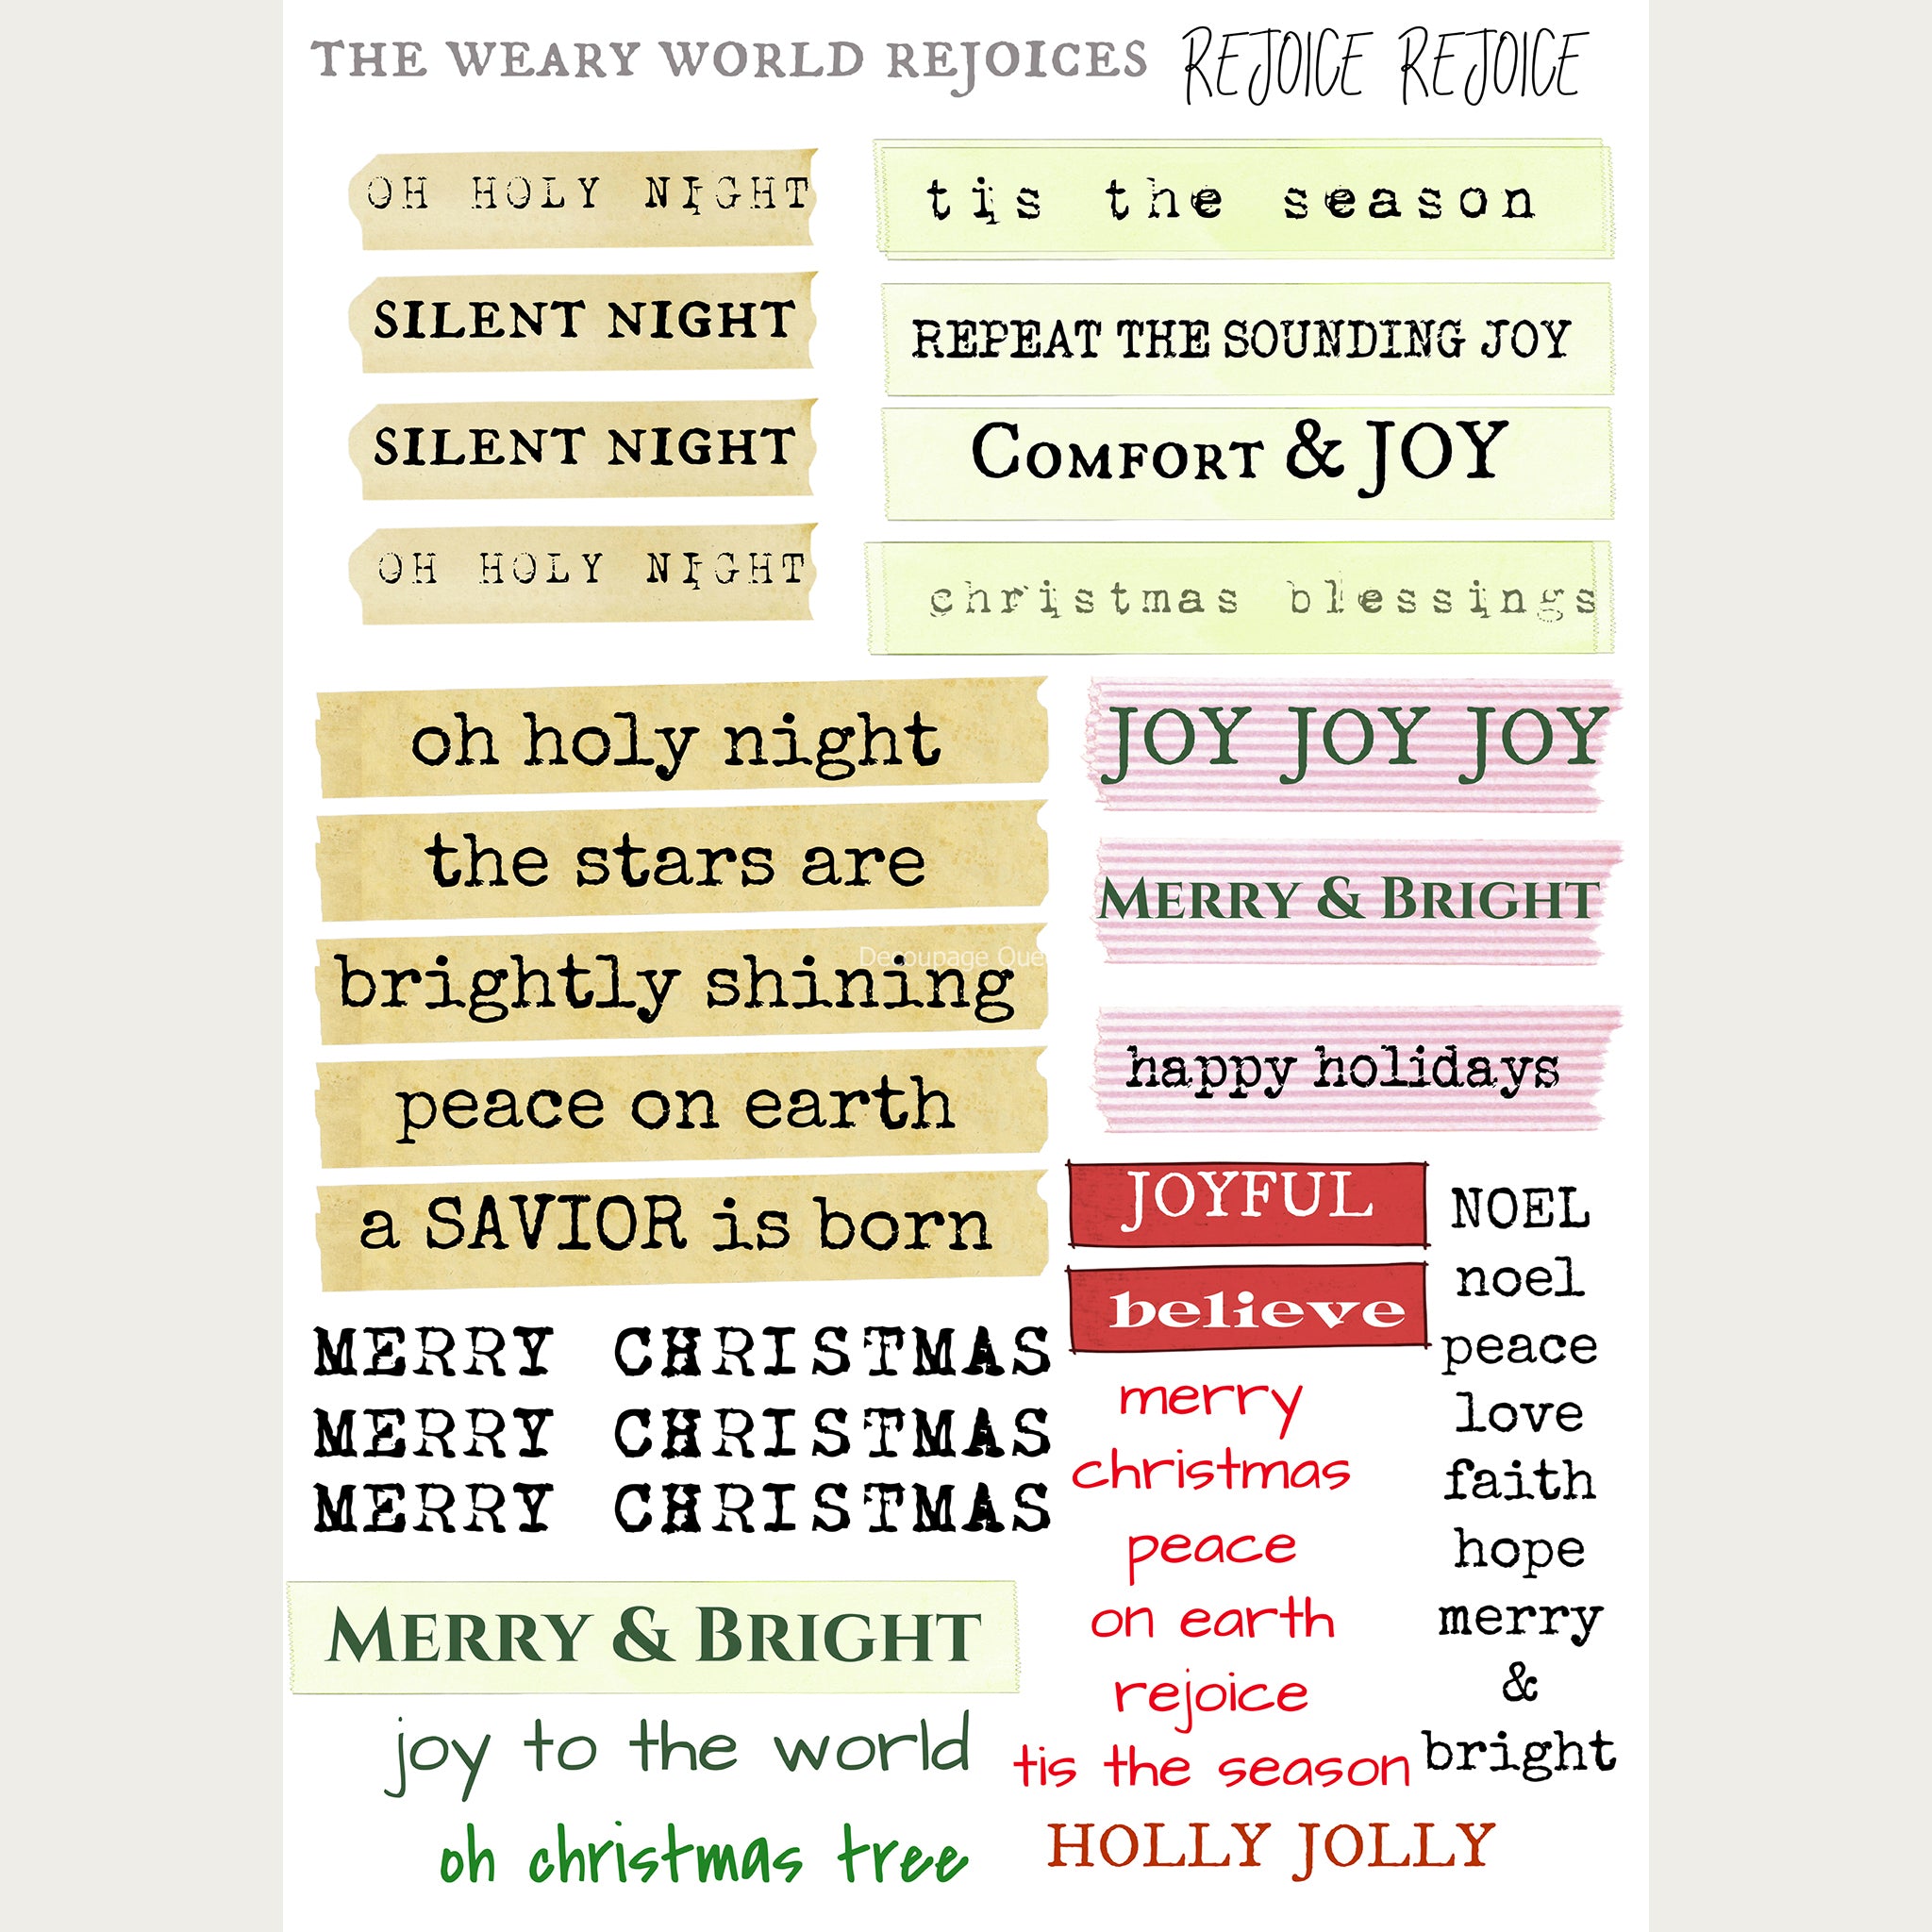 A3 rice paper design of Christmas song lyrics and sayings. Cream colored borders are on the sides.